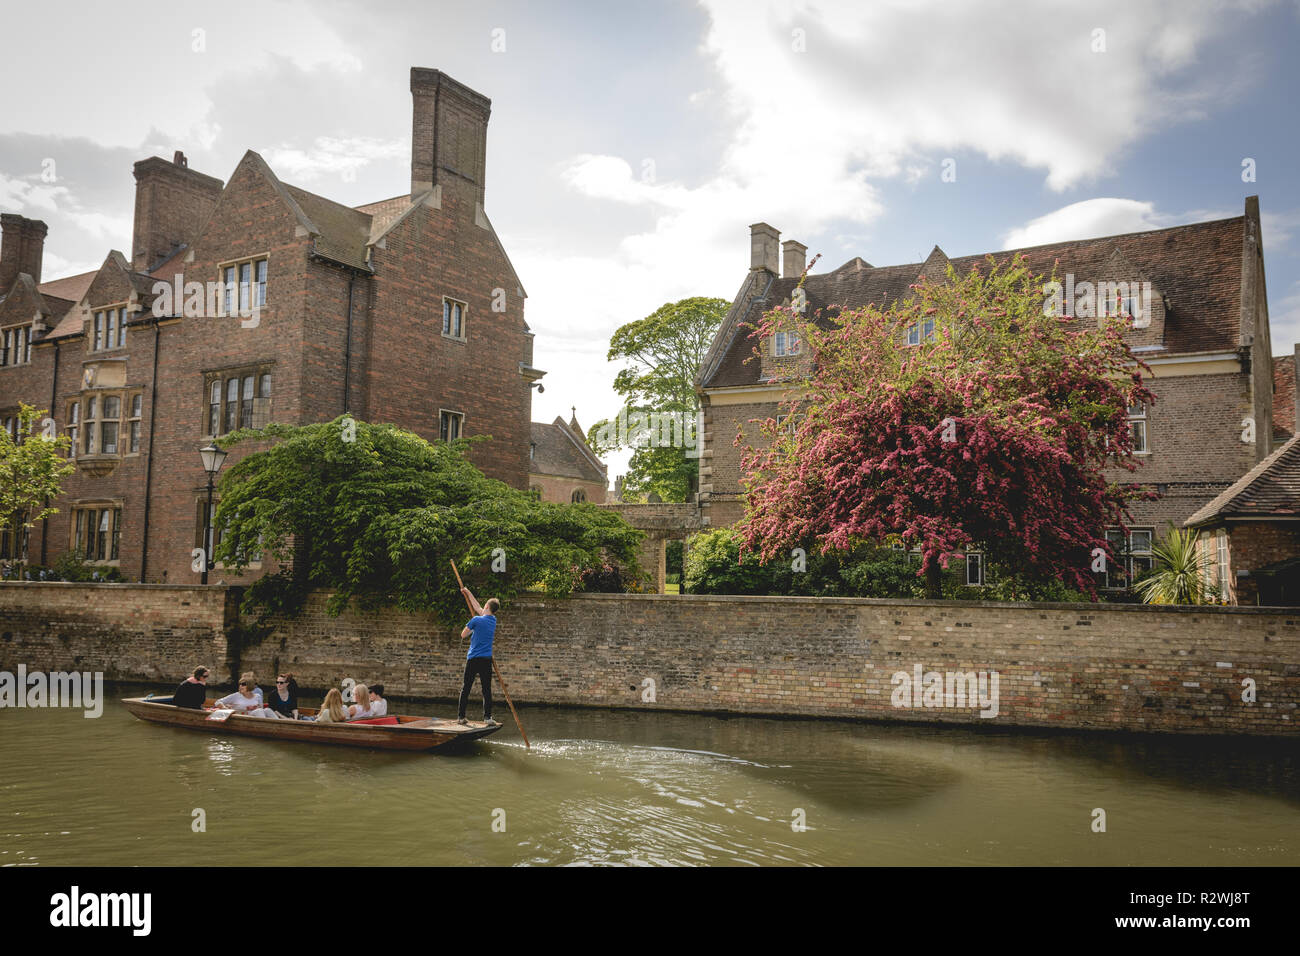 Cambridge, UK - February, 2019. Tourist on a punt sightseeing trip on the river Cam through the back of various colleges. Stock Photo